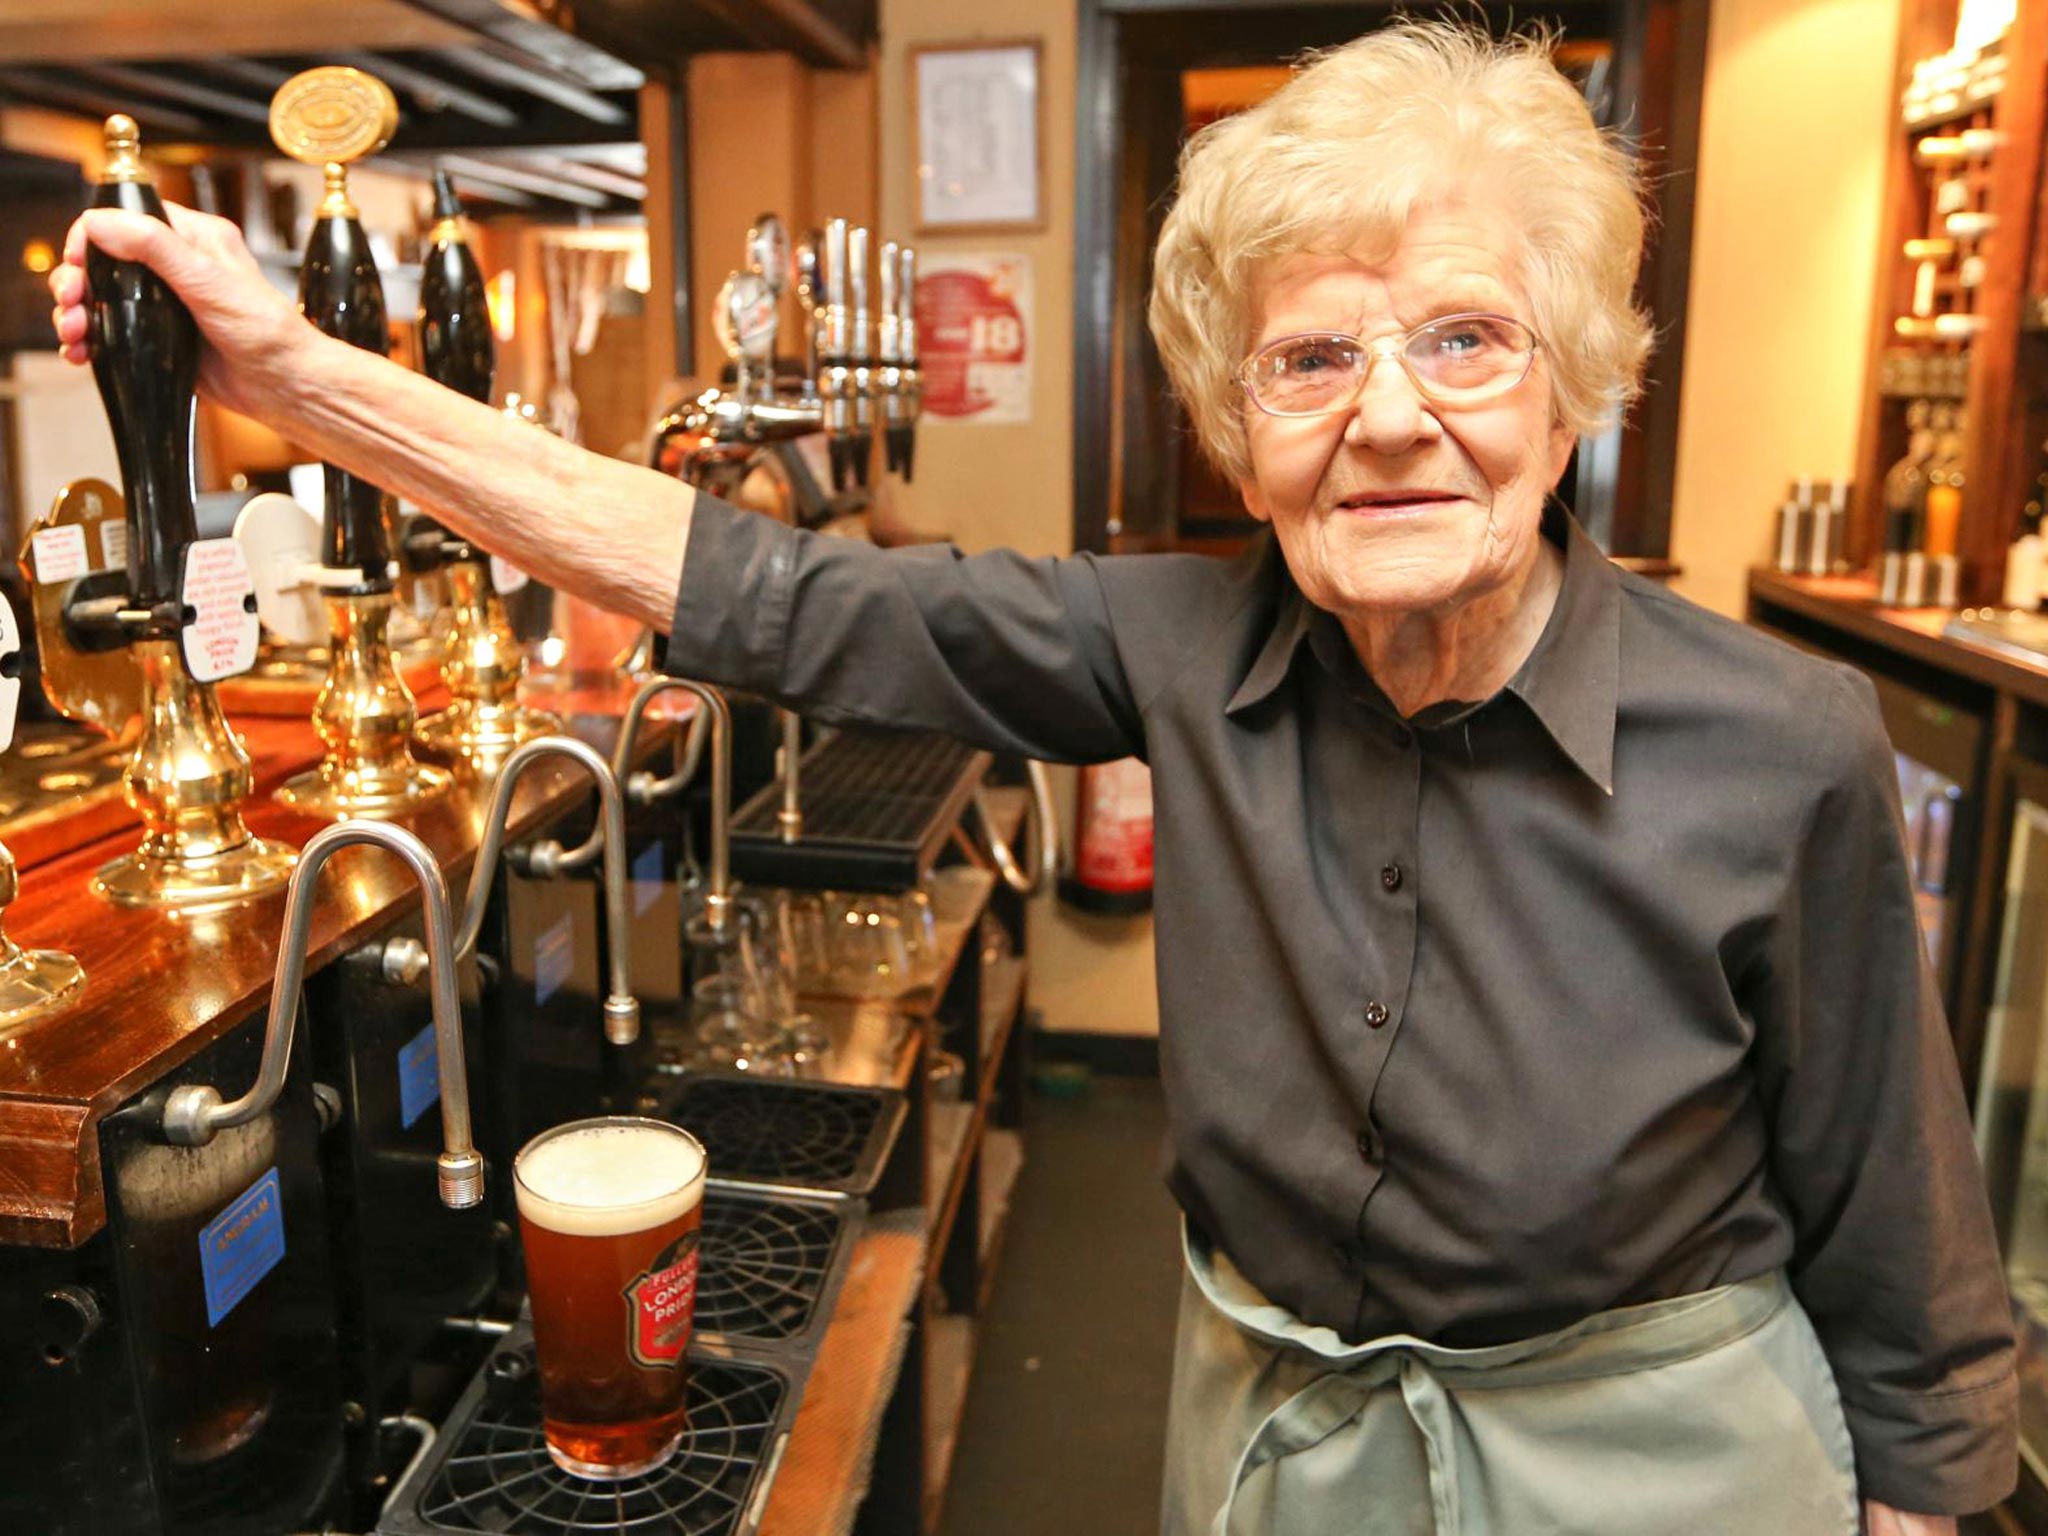 One hundred years of age and a great-great-grandmother, Dolly, from Wendover, Buckinghamshire, is known as the “oldest barmaid in the world”. She has been pulling pints at the Red Lion Hotel for 75 years and still does three shifts a week. Dolly says she